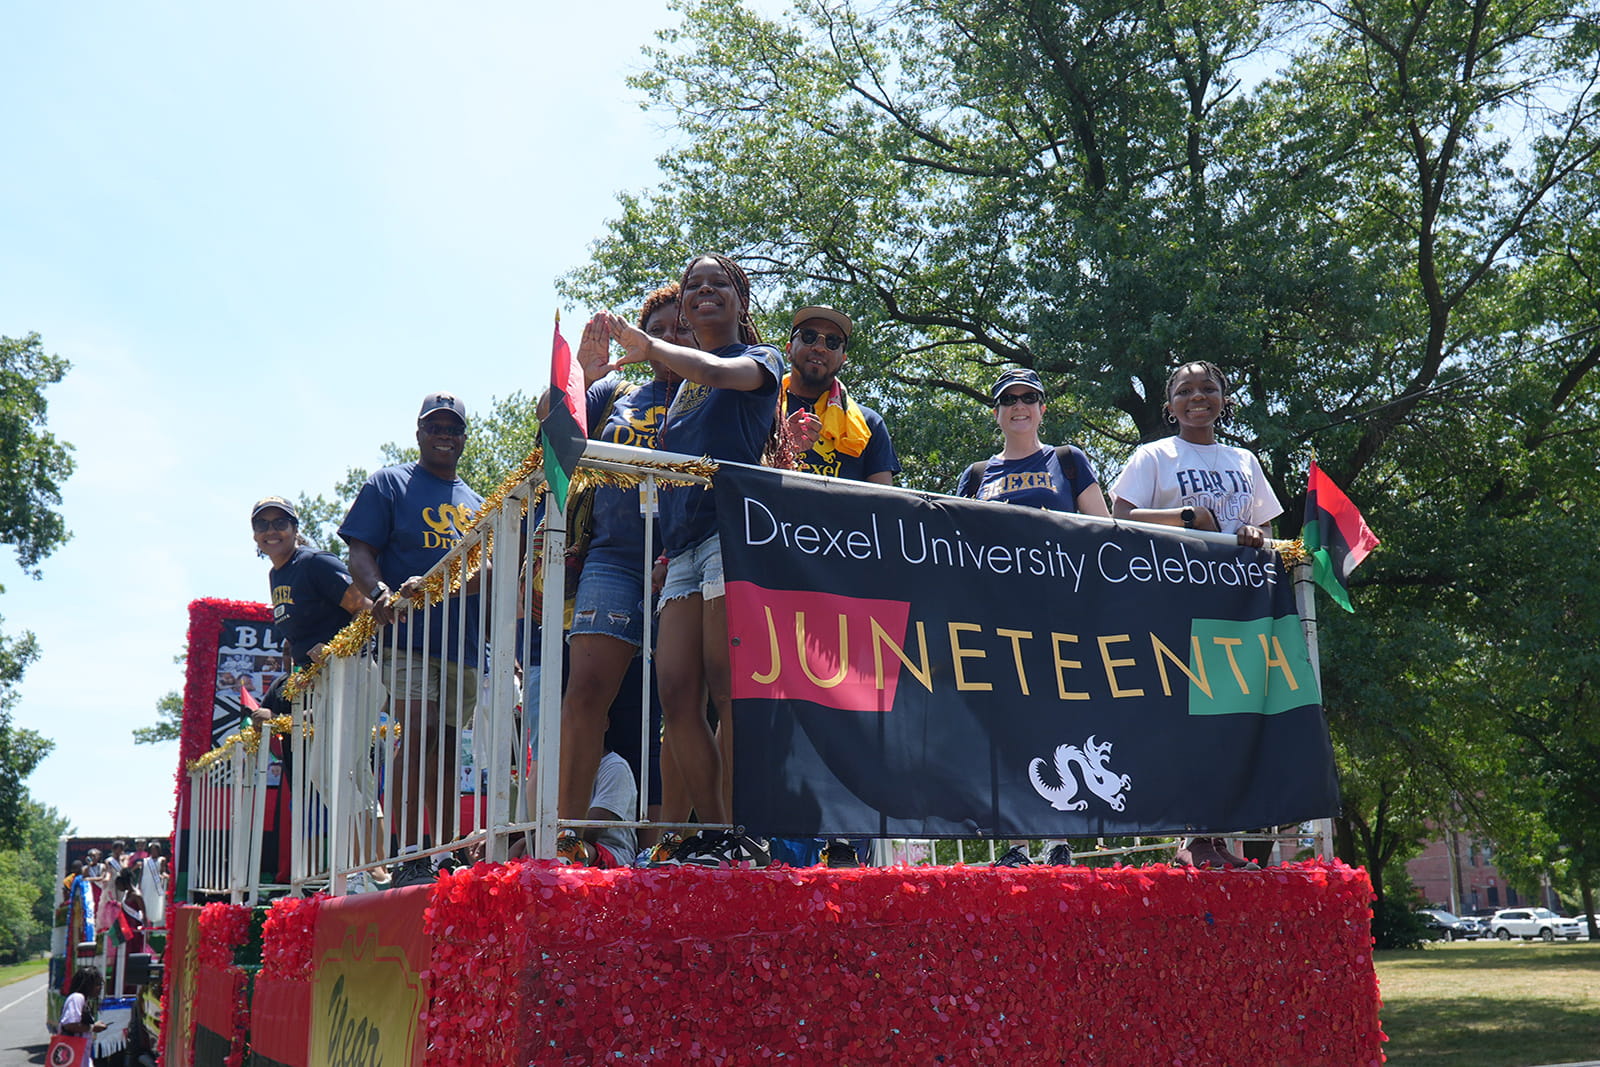 A view of Dragons on Drexel's float that appeared in Philadelphia's Juneteenth parade.